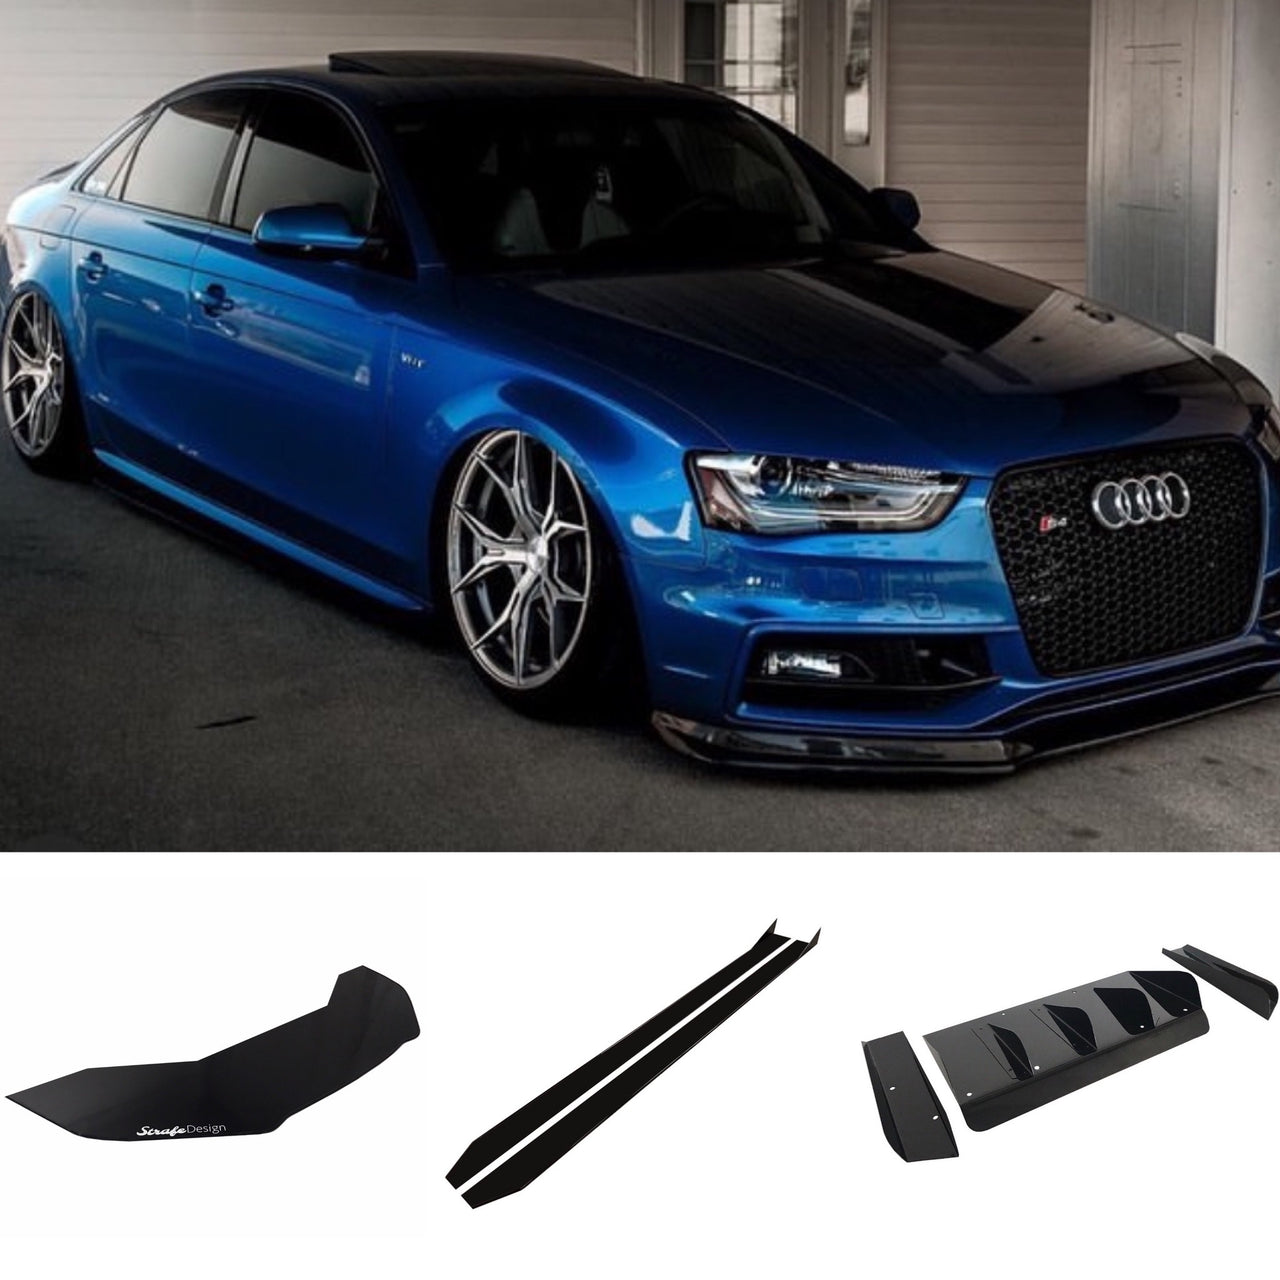 Aerokit for the AUDI A4 B8 S-line from JMS